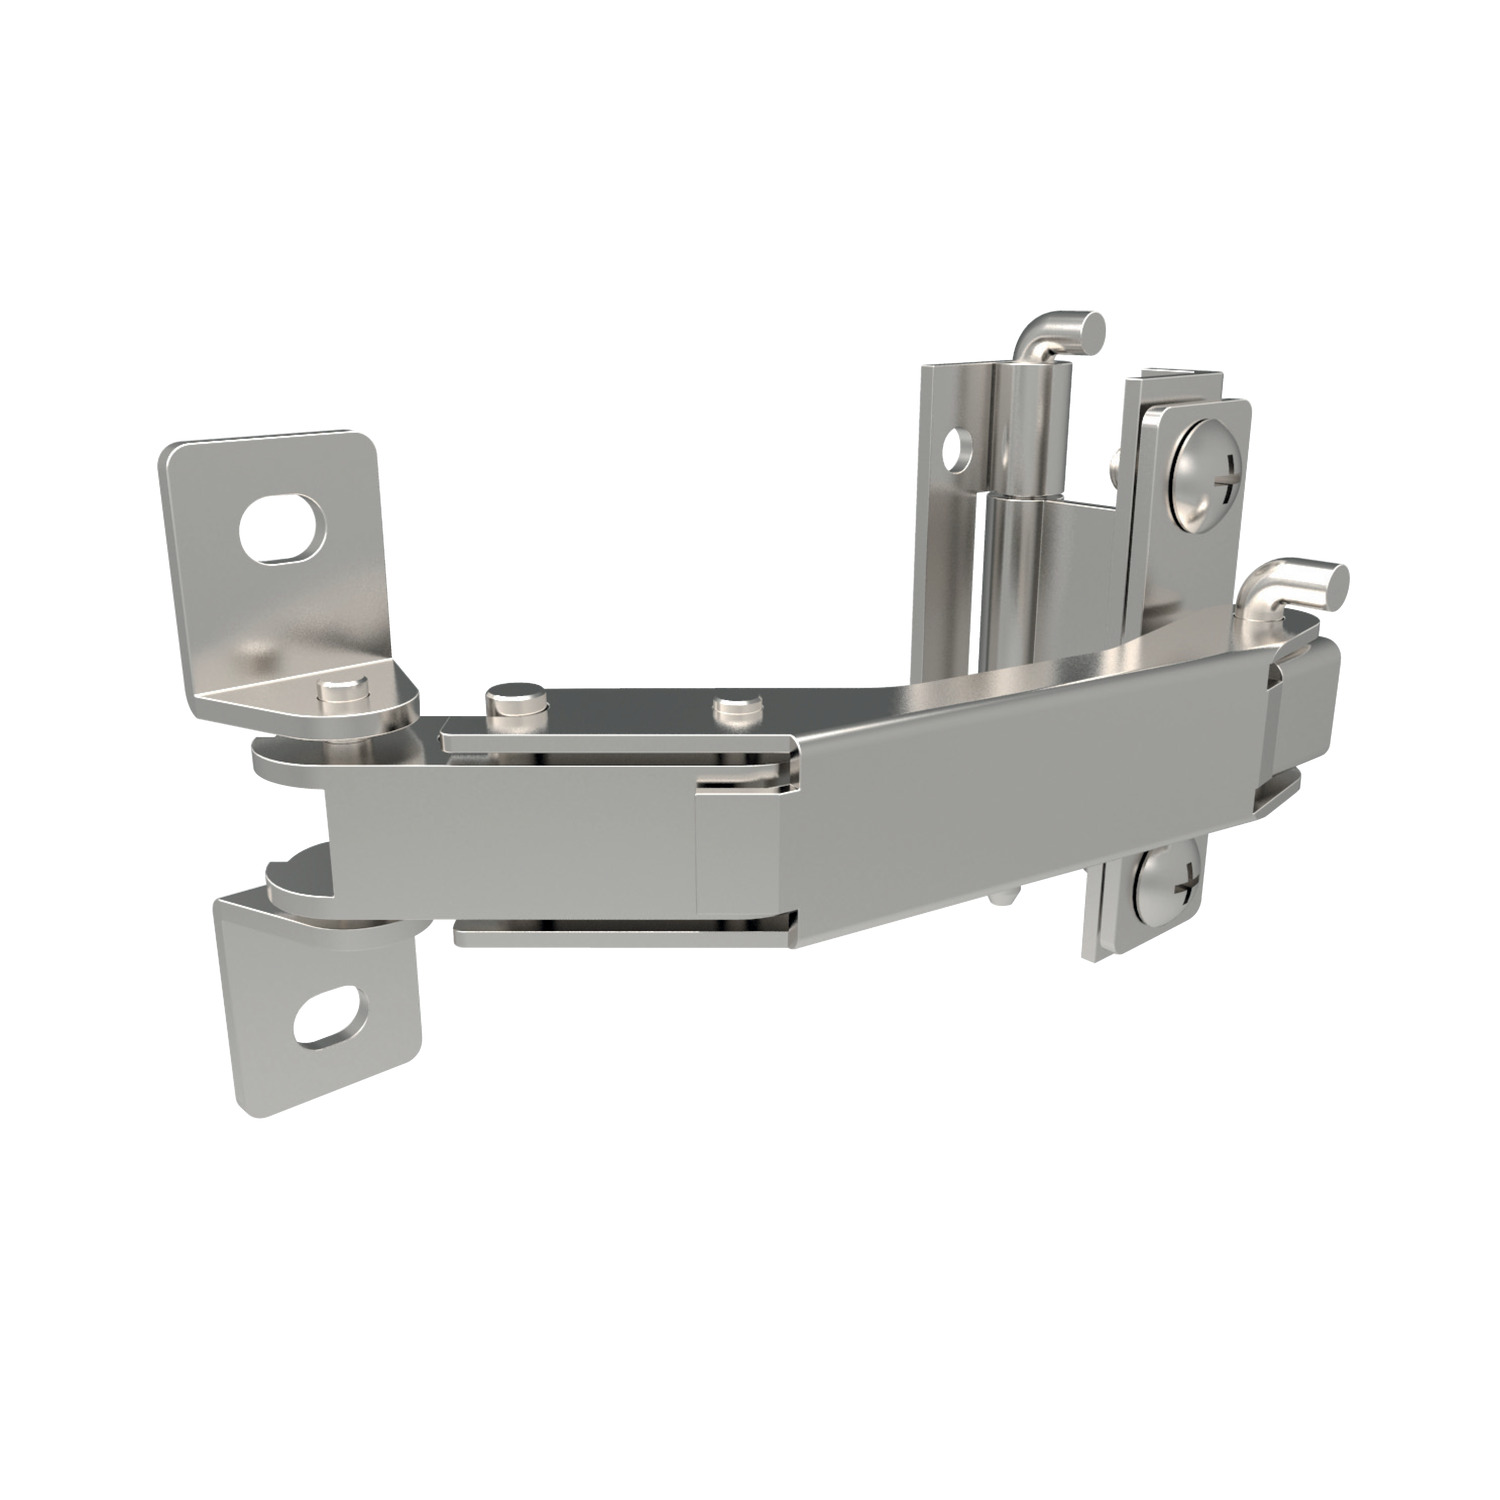 S2250.AC0010 Concealed Pivot Hinges - Integral Stay Screw mount - Stainless steel